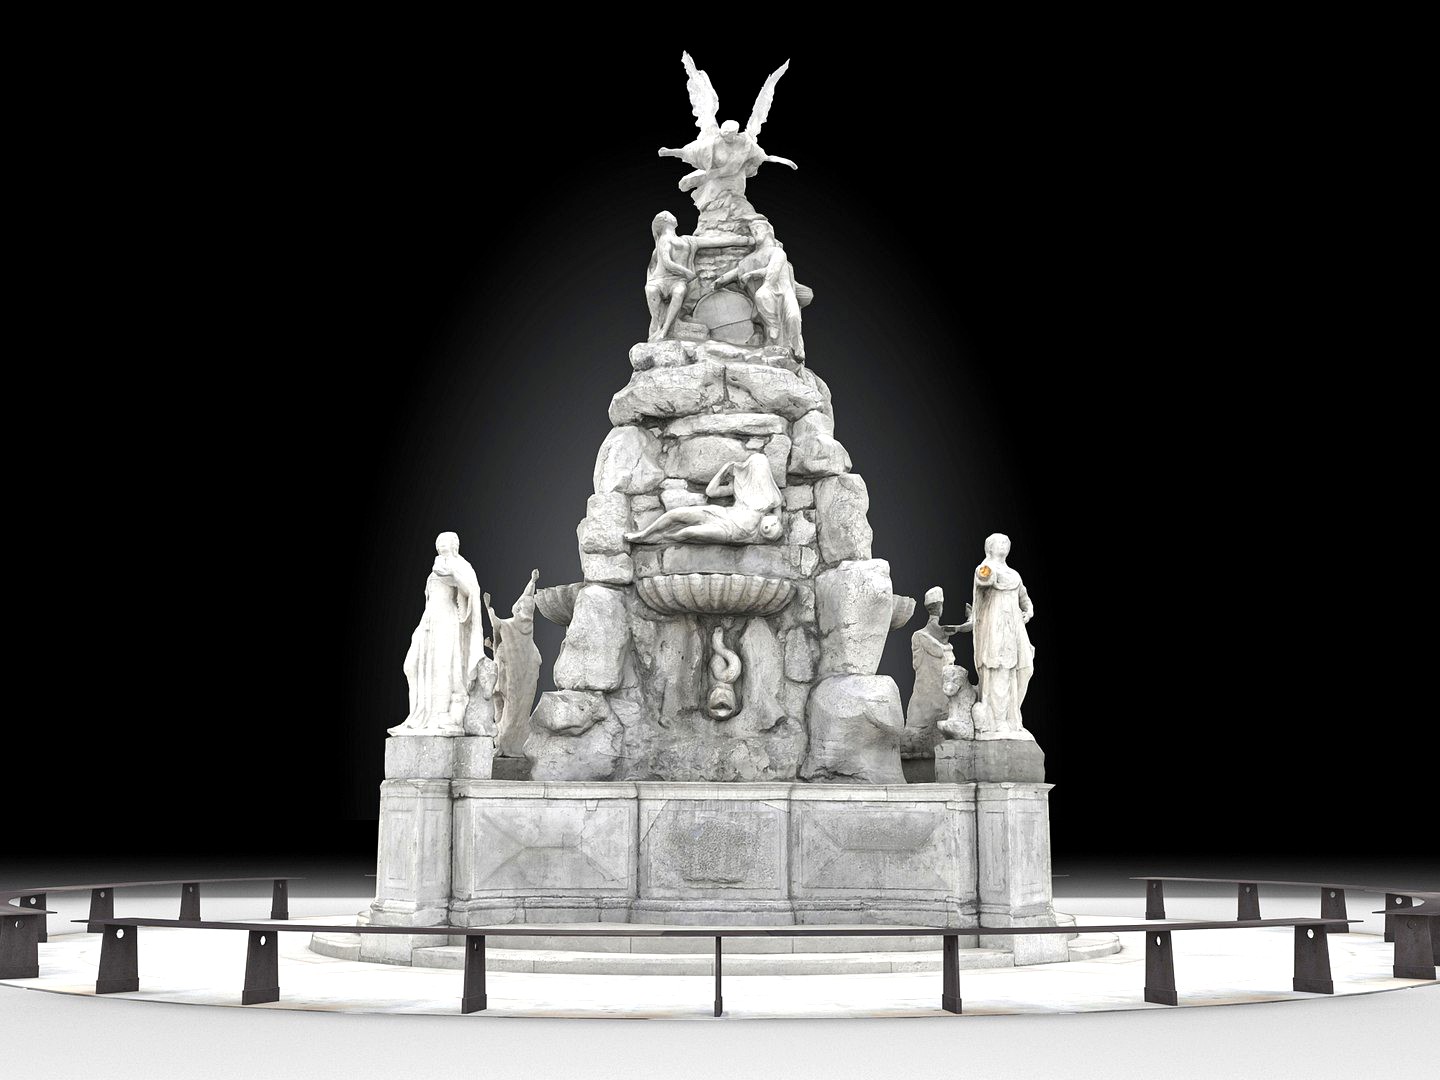 Fountain of the Four Continents